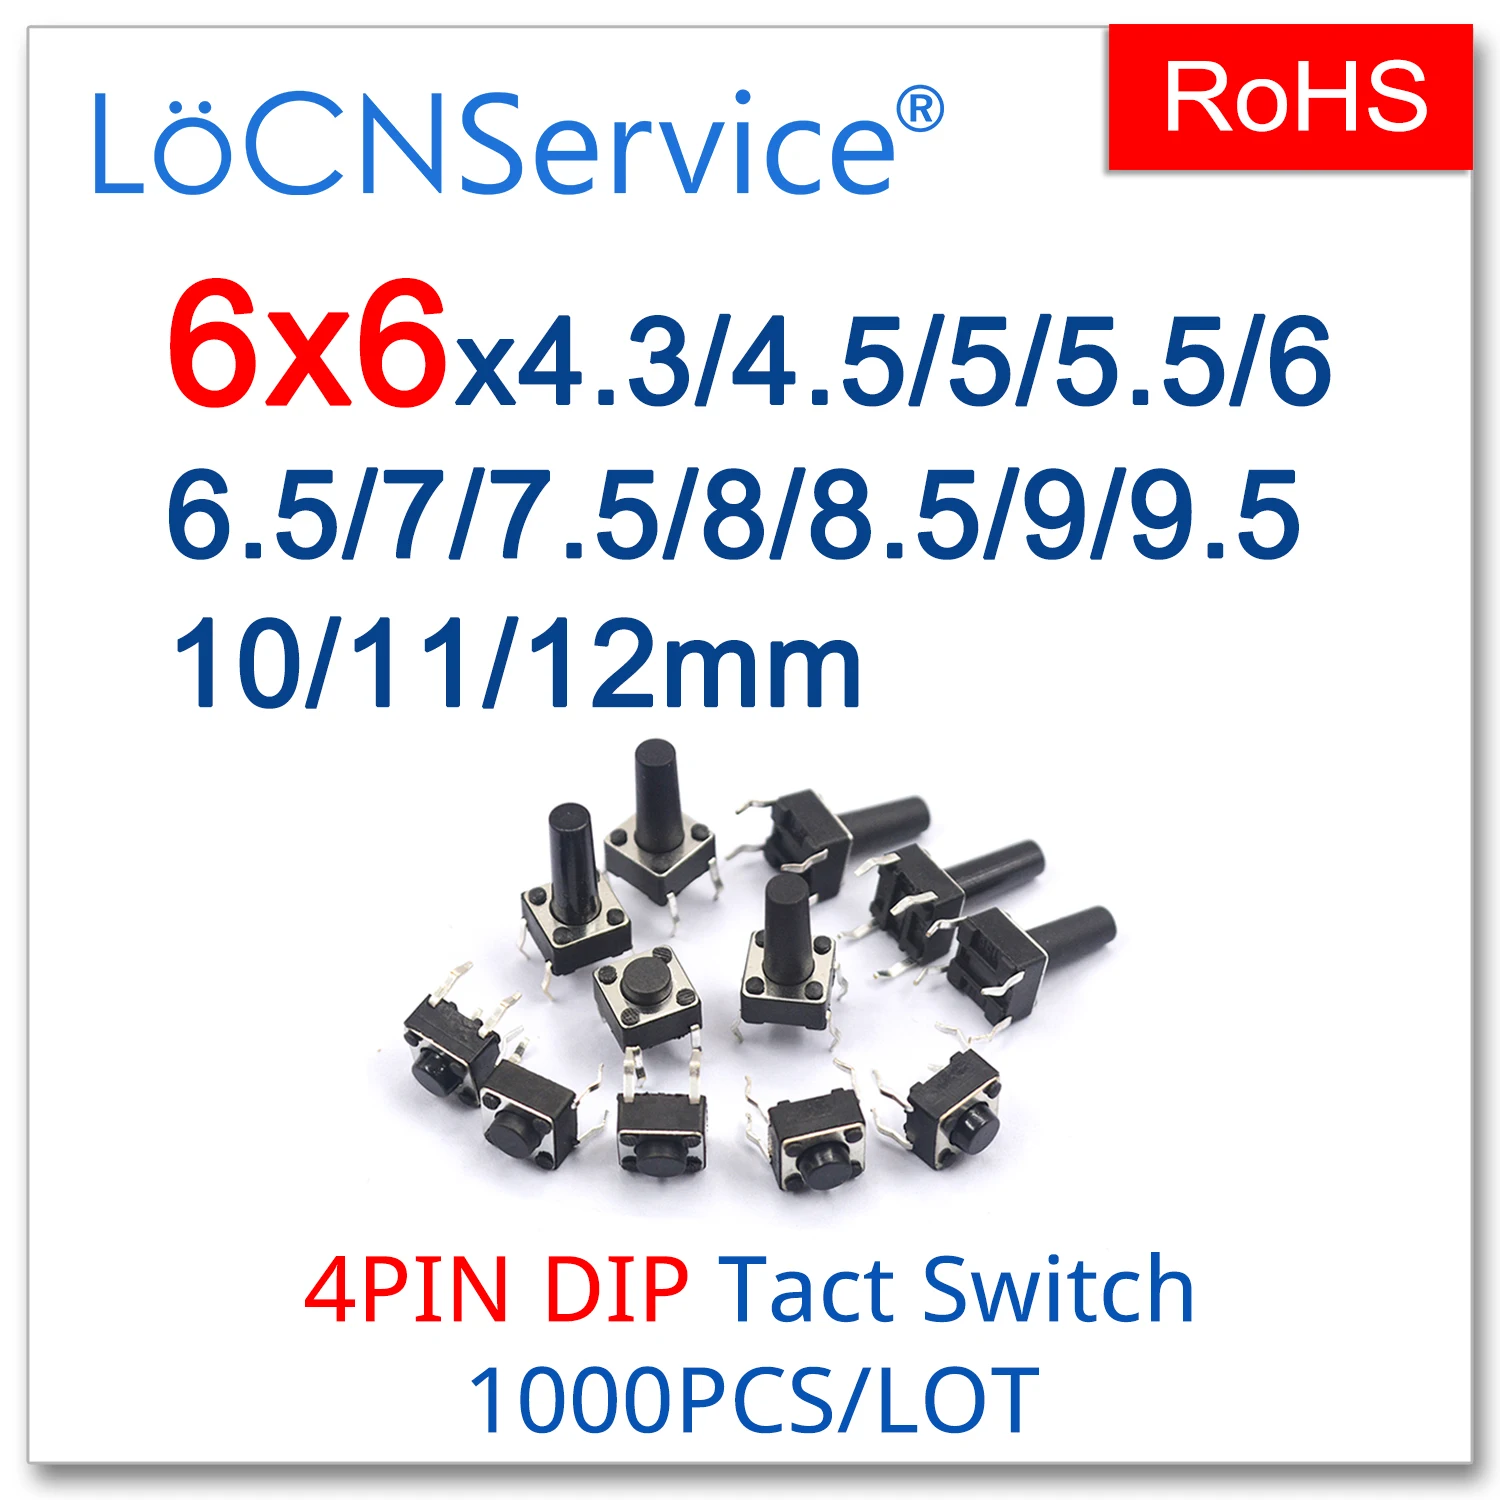 

LoCNService Micro Tact Push Button Switches 1000PCS Copper 6*6 DIP 4PIN 12V 6x6x4.3/4.5/5/5.5/6/6.5/7/7.5/8/8.5/9/9.5/10/11/12mm